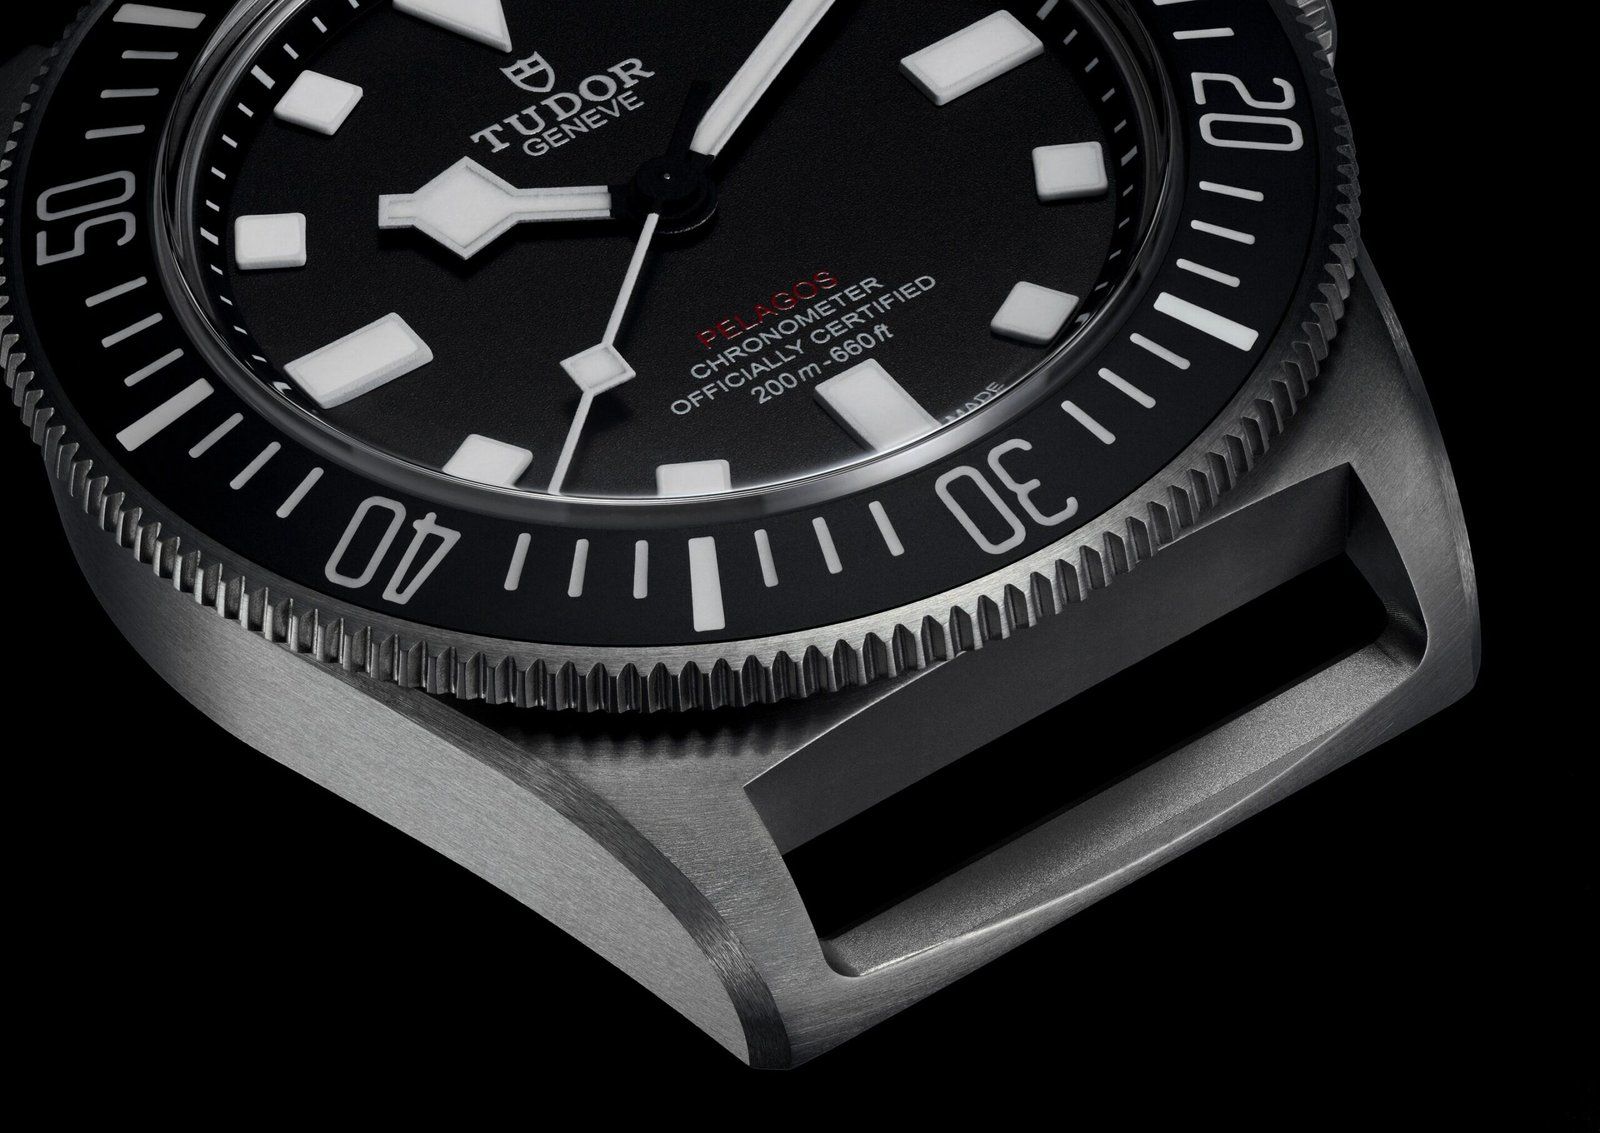 The bezel is cleverly engraved with a 12-hour graduated track while retaining its fixed position. 